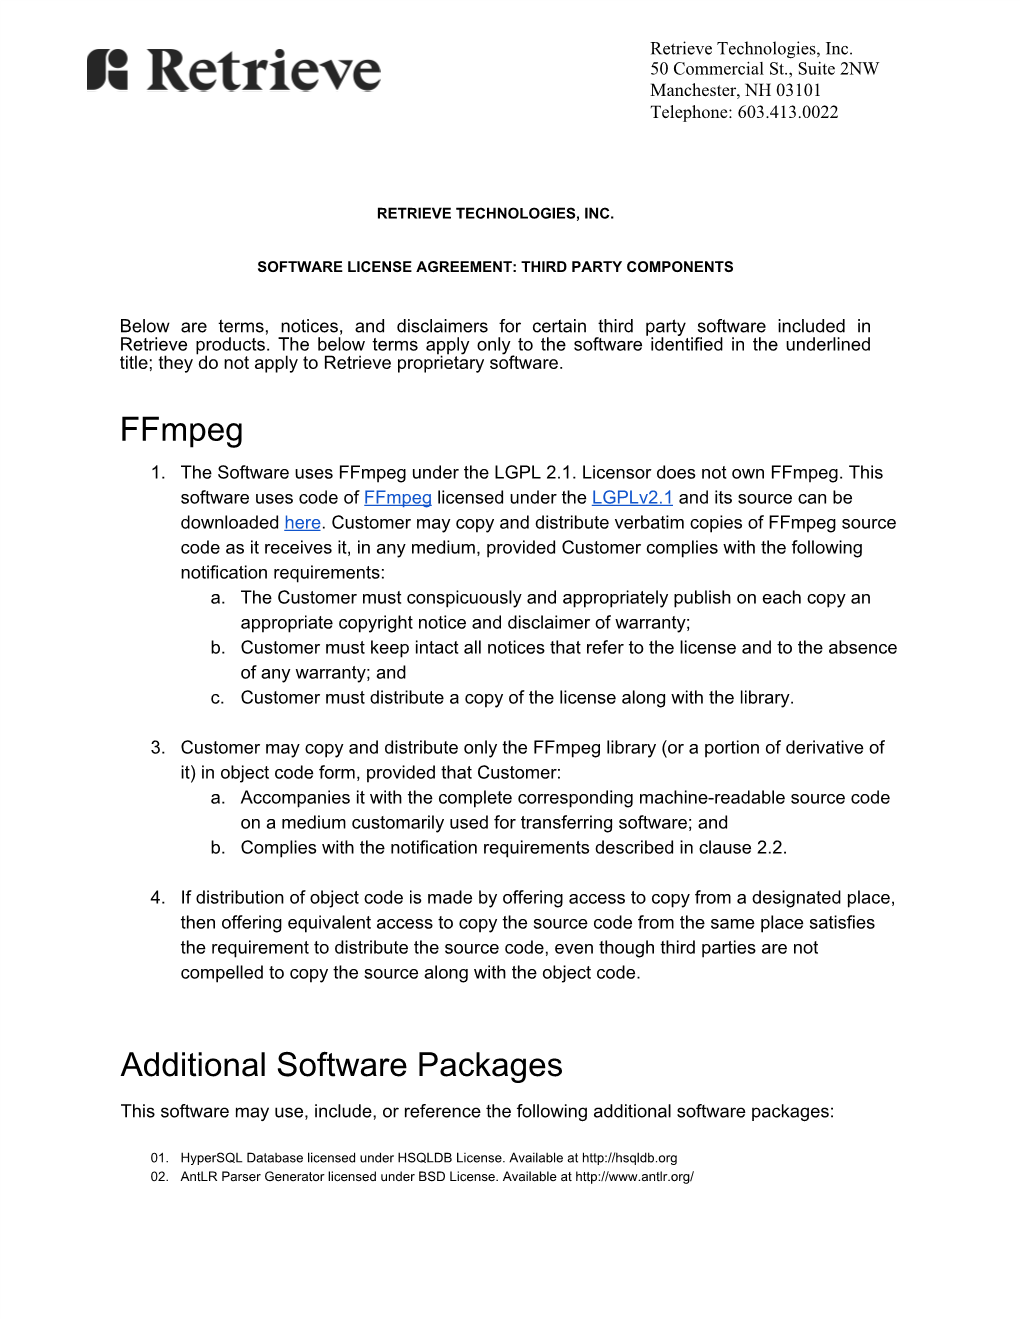 Ffmpeg Additional Software Packages